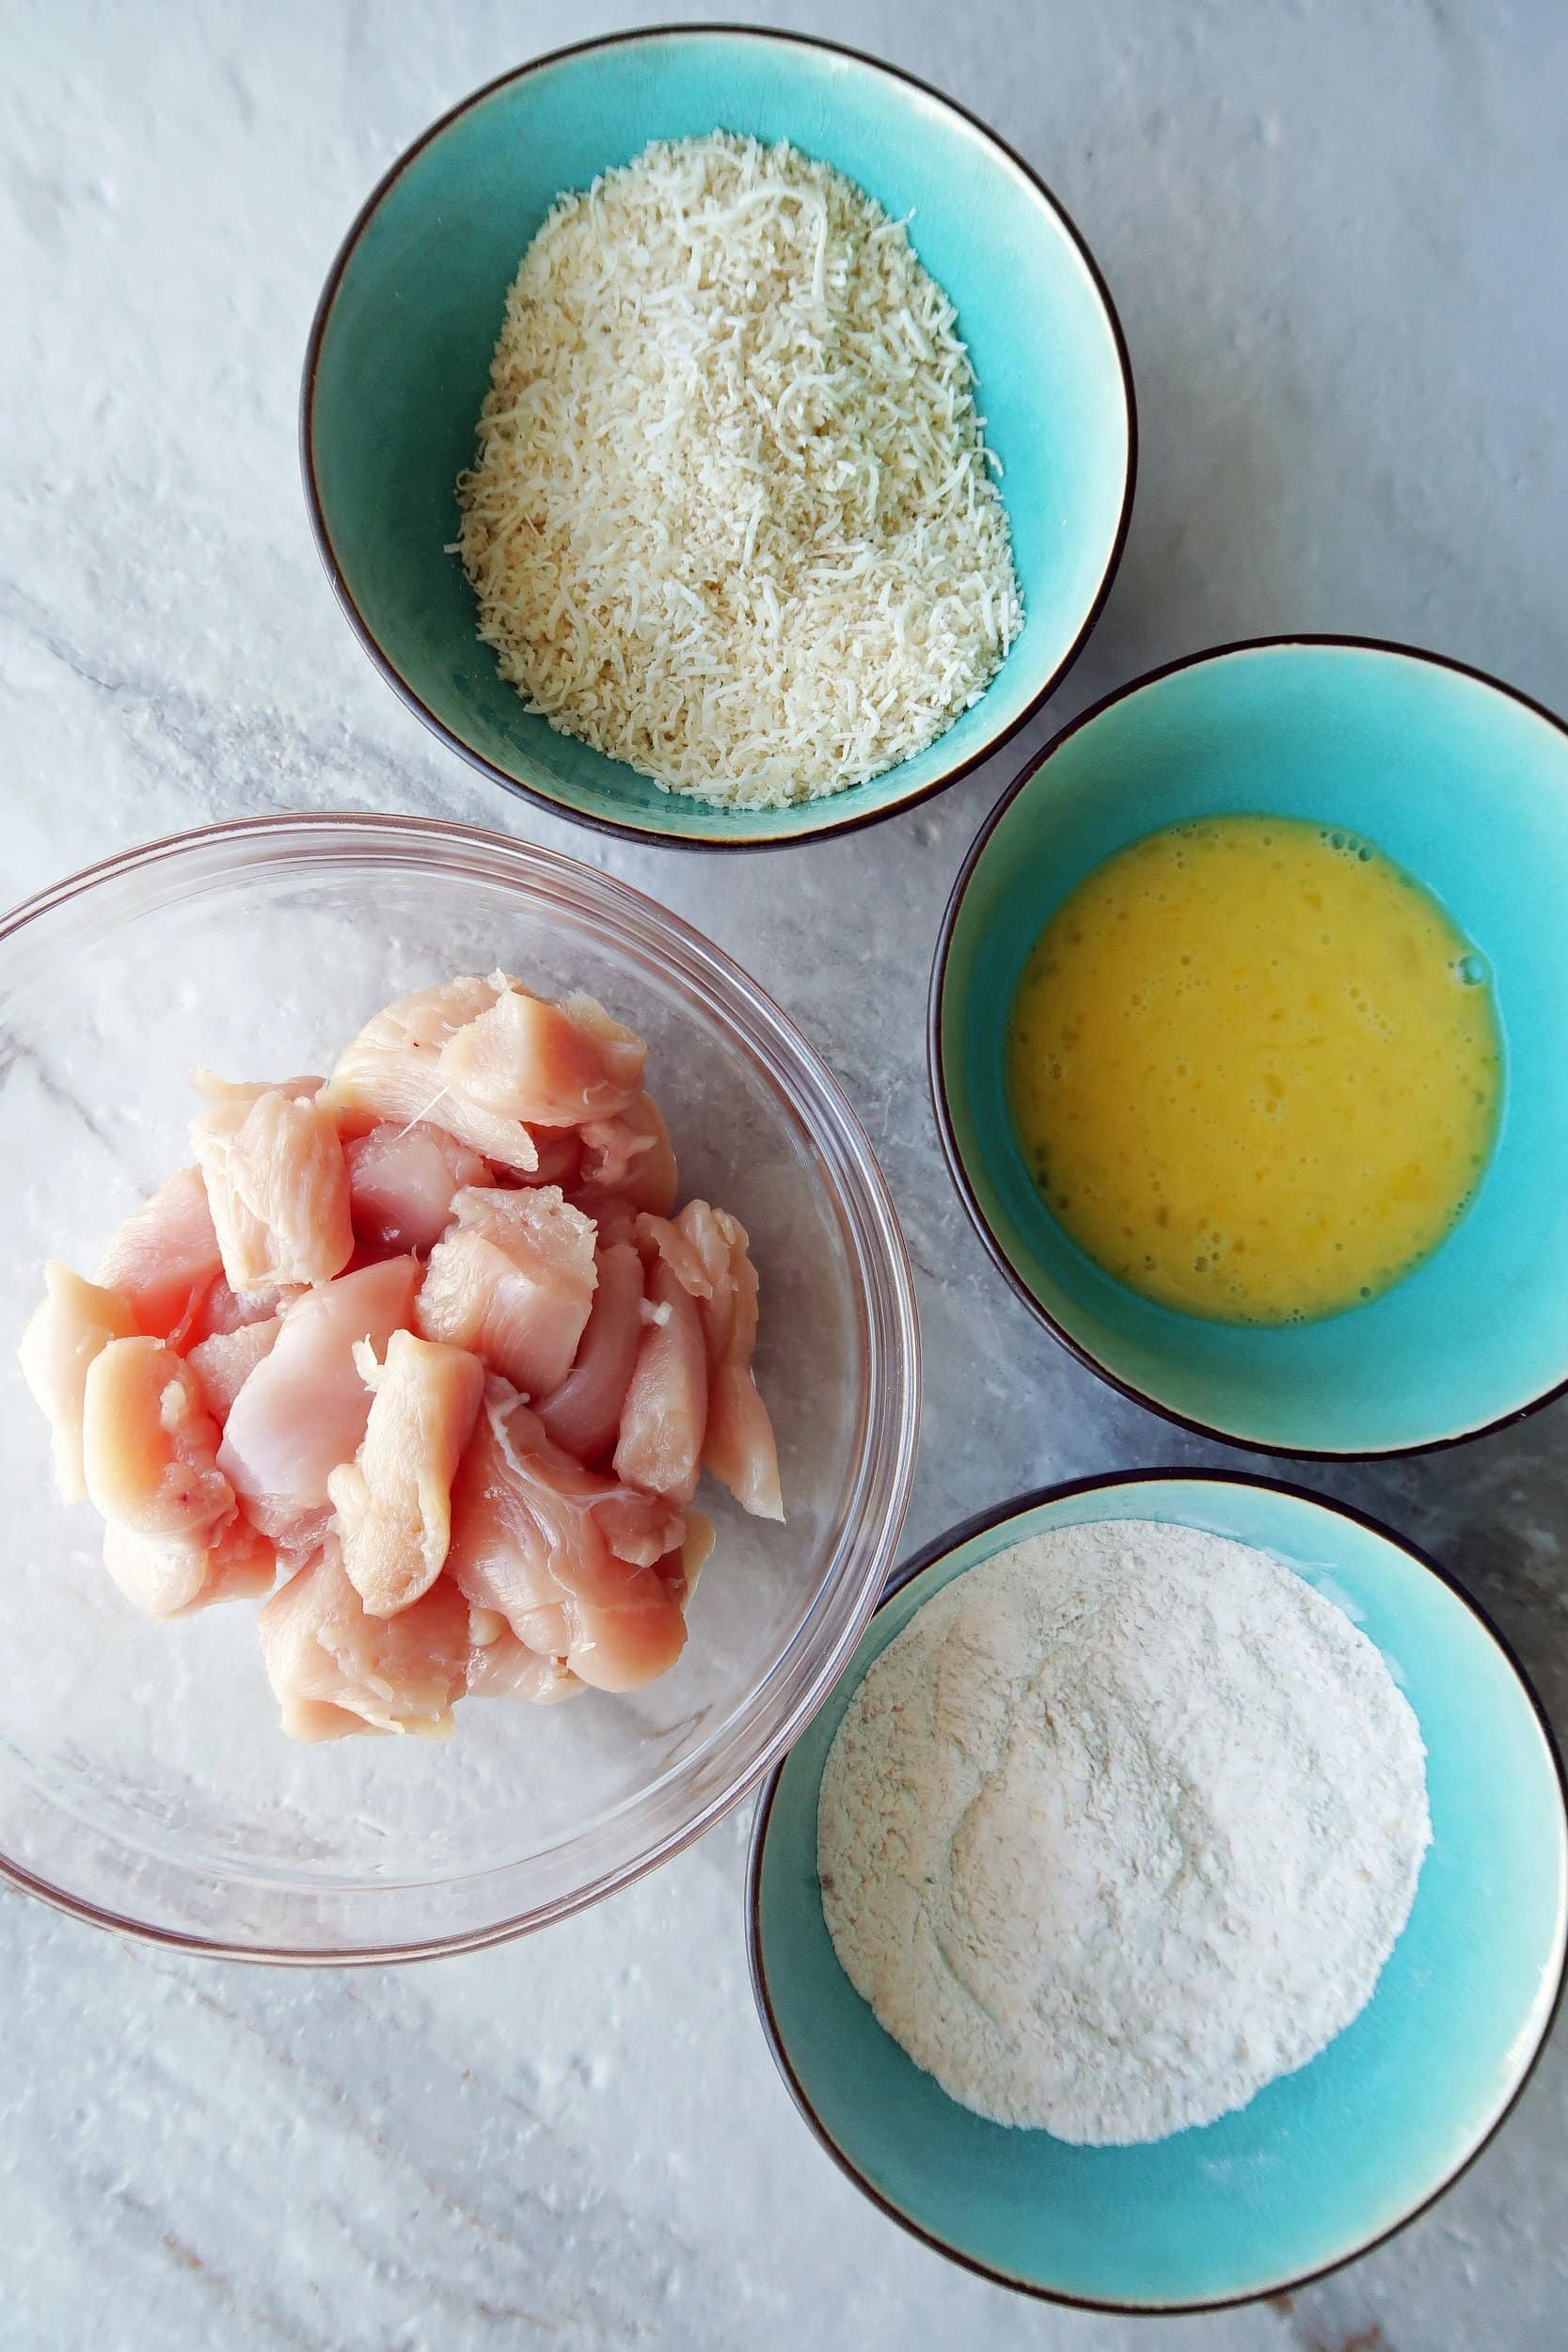 Four bowls for dredging: flour with spices, eggs, shredded coconut with Panko breadcrumbs, and raw chicken pieces.